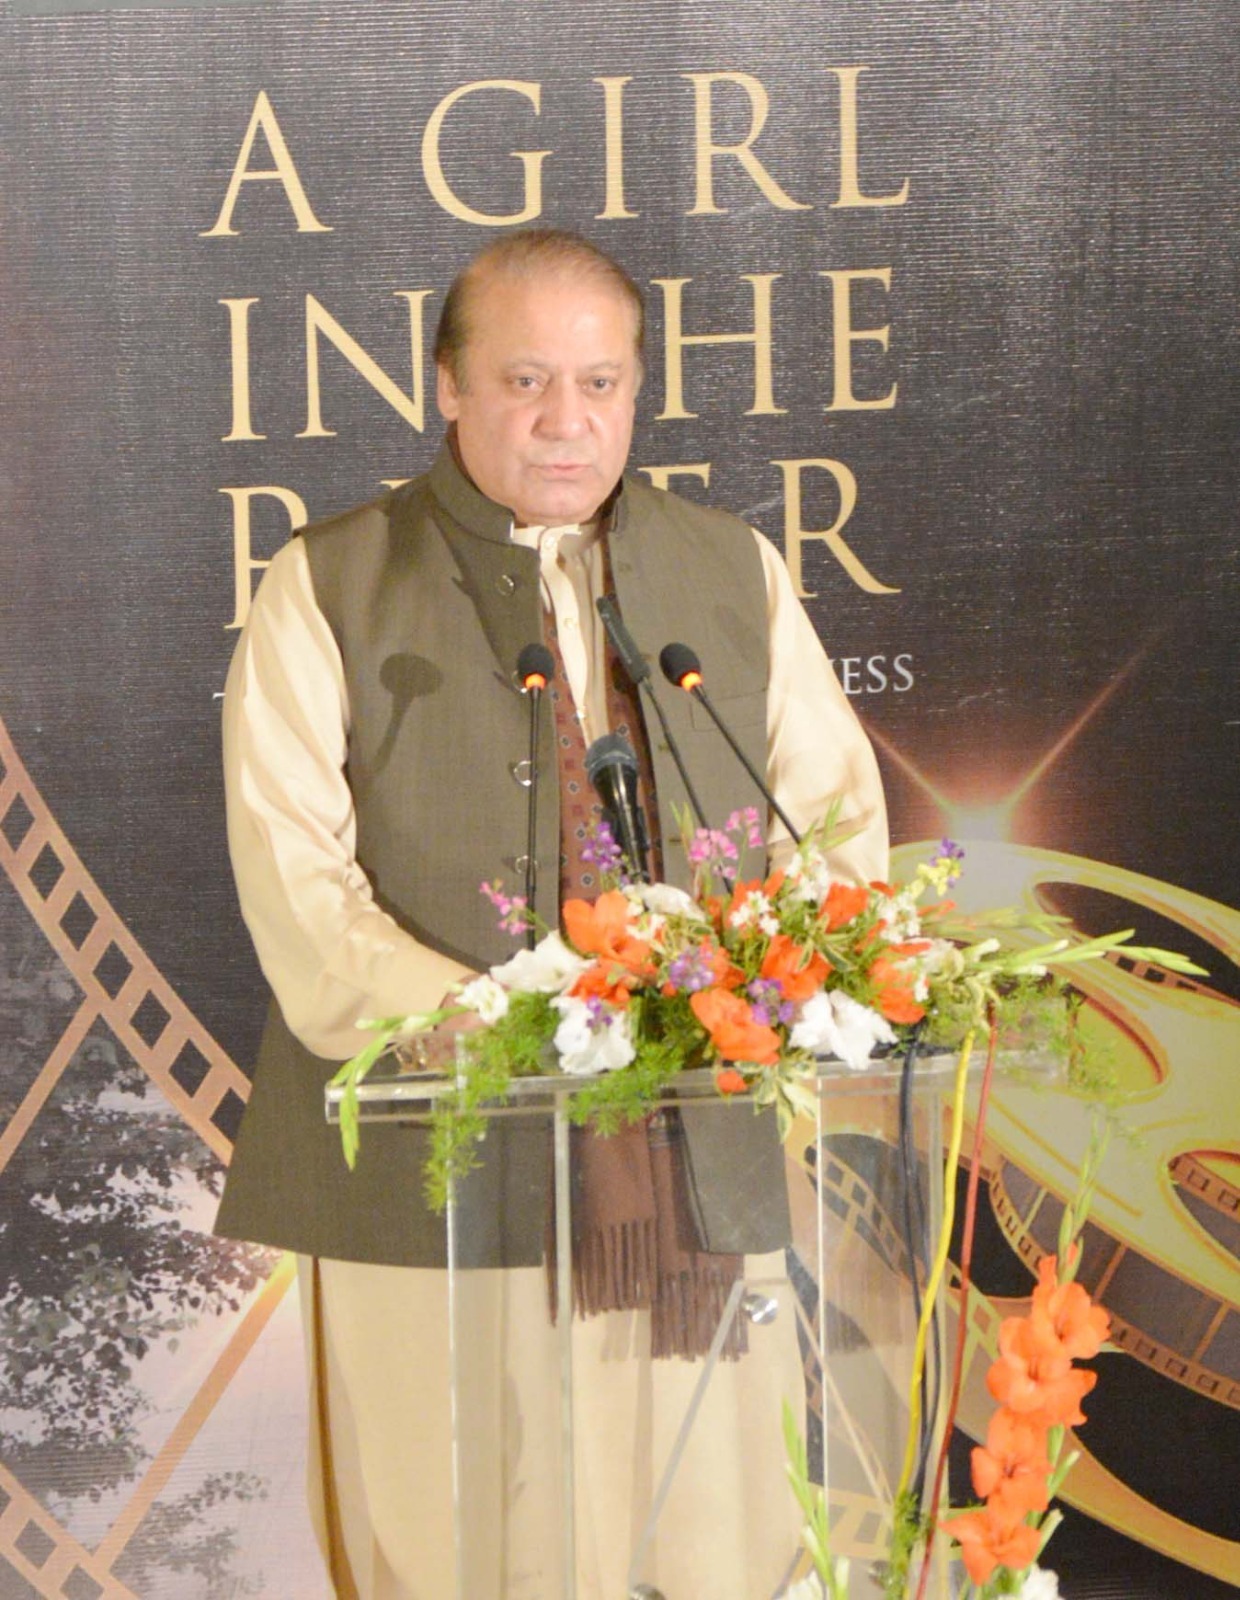 Prime Minister of Pakistan addressing the media and guests post screening